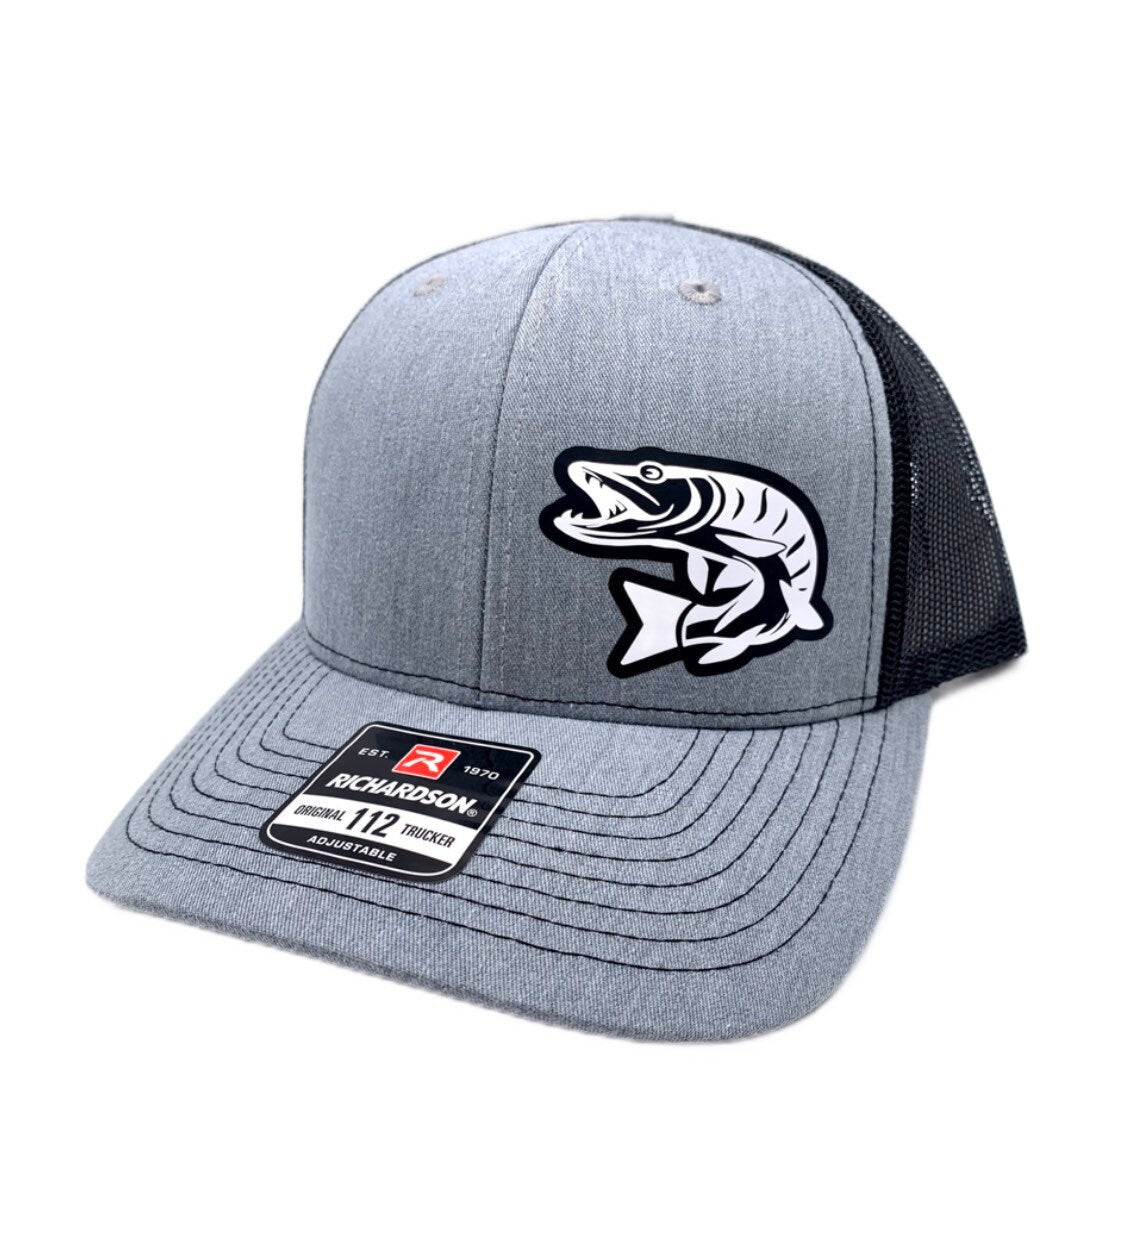 Musky Fishing SnapBack Adjustable Hat with multiple hat color options